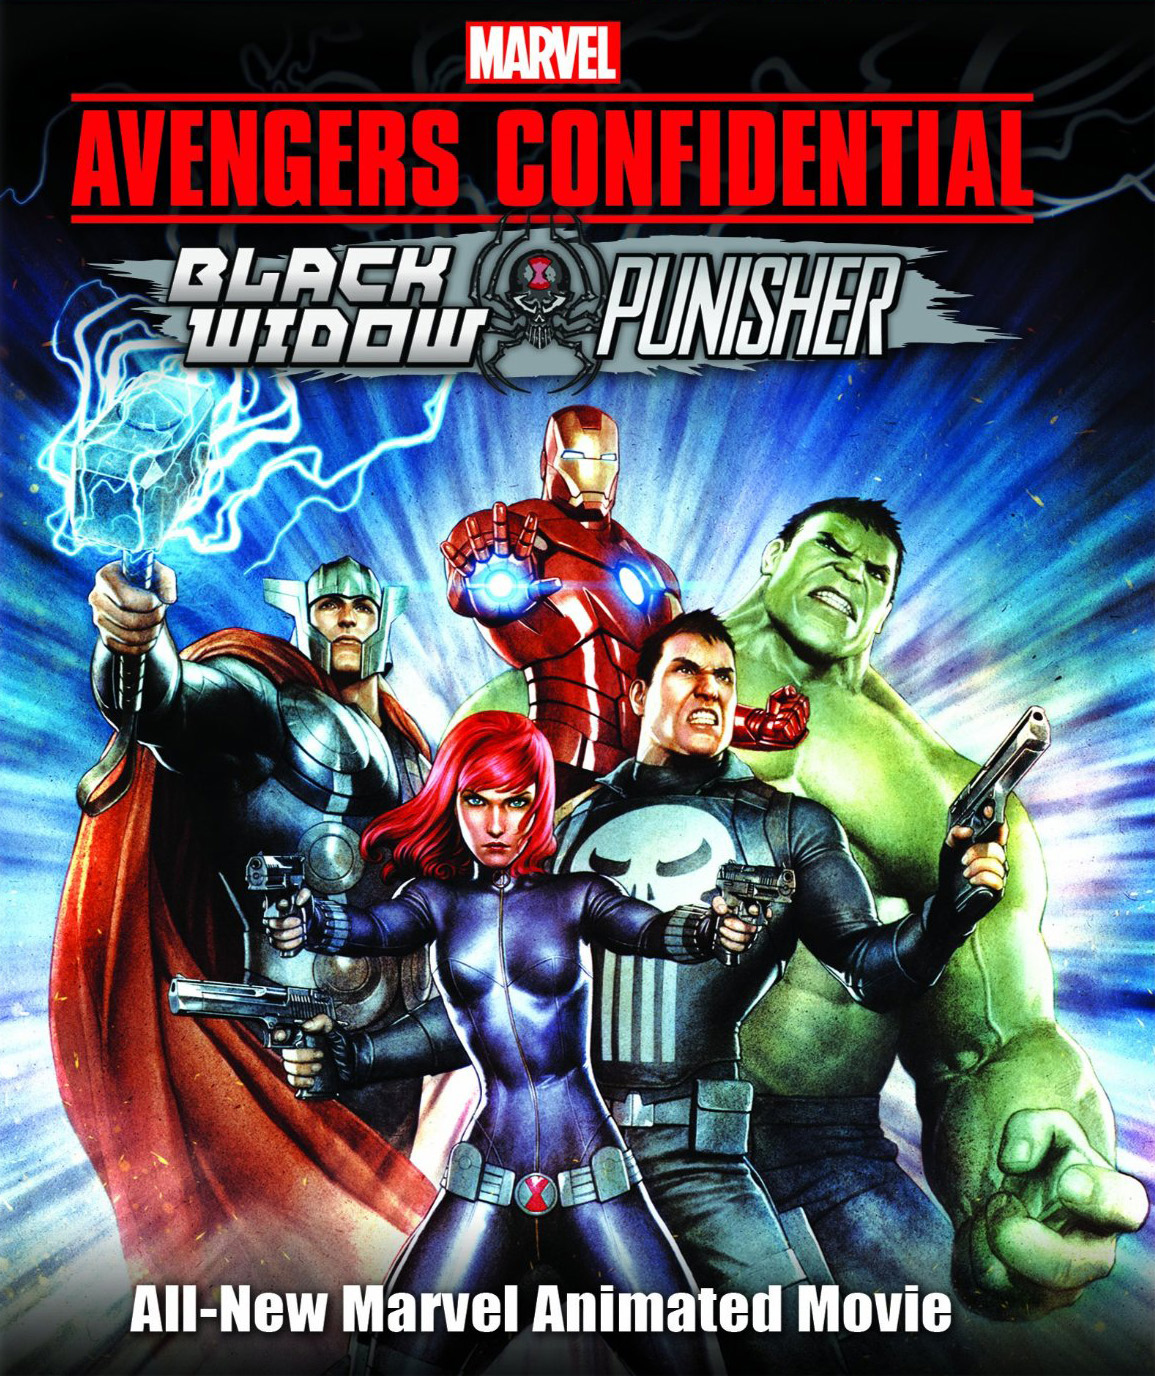 http://s6.picofile.com/file/8211949068/Avengers_Confidential_2014_cover_large.jpg